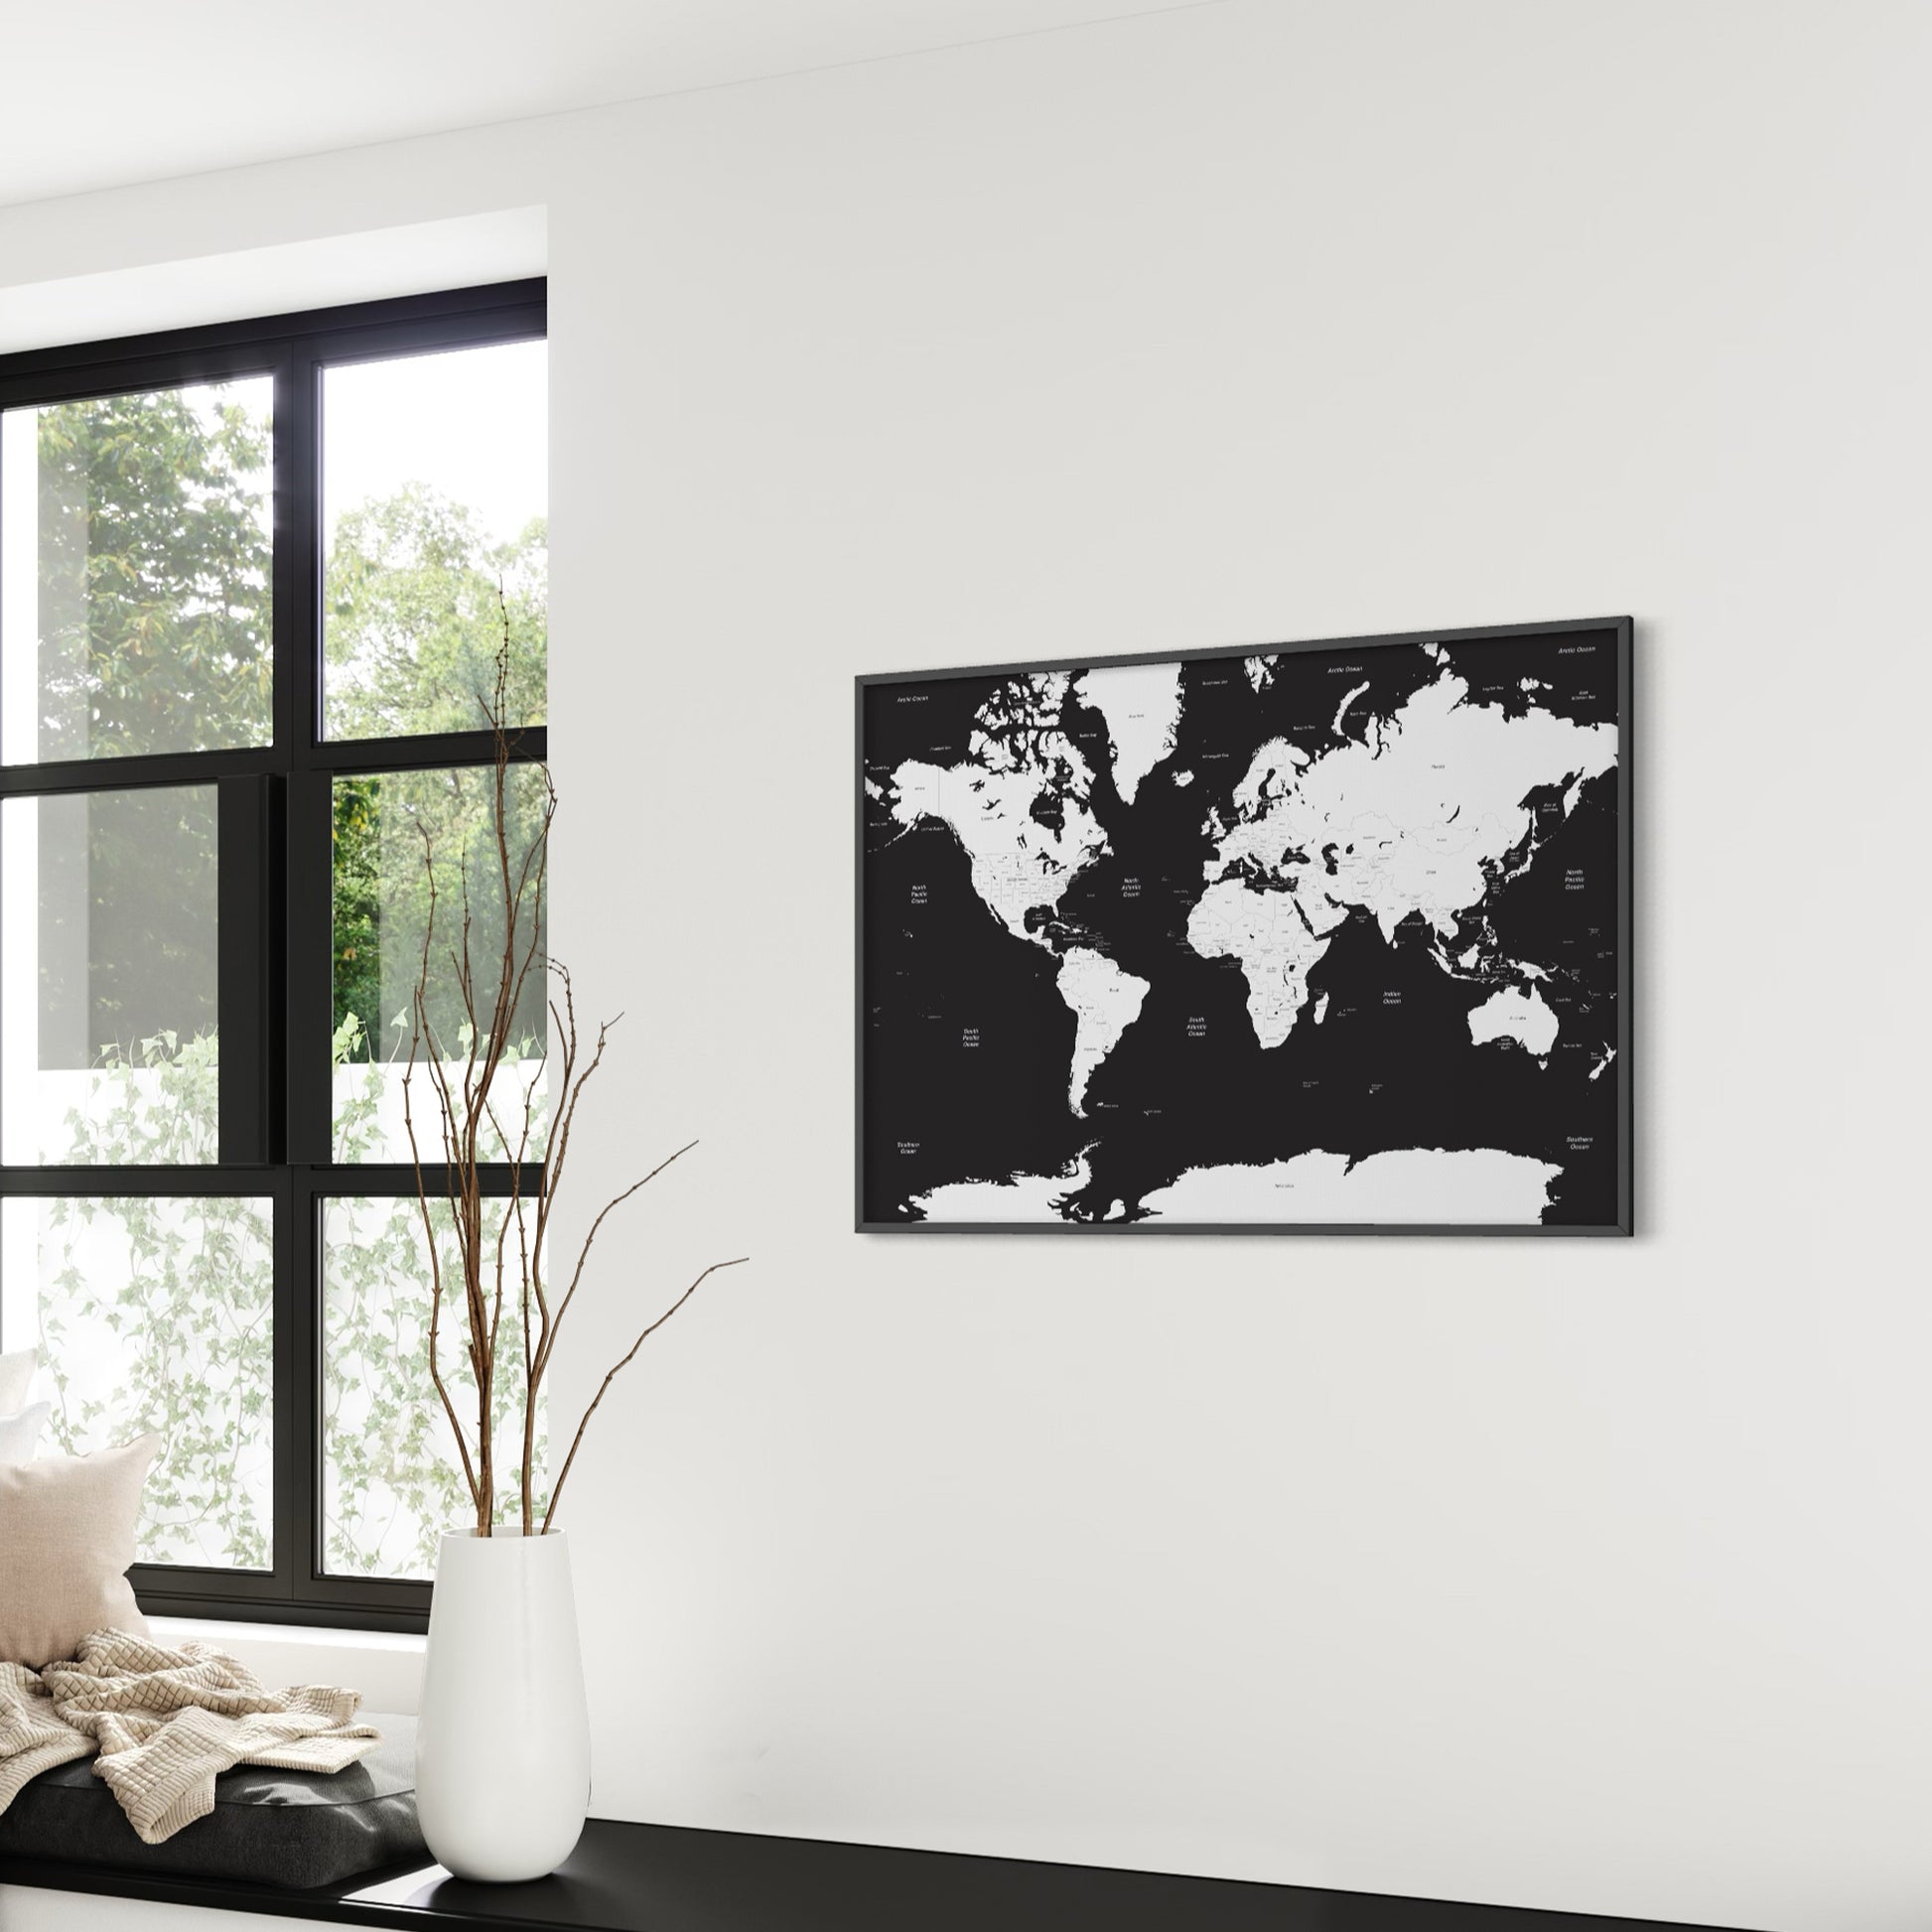 Black Sea White Countries World Map in Industrial Room Design